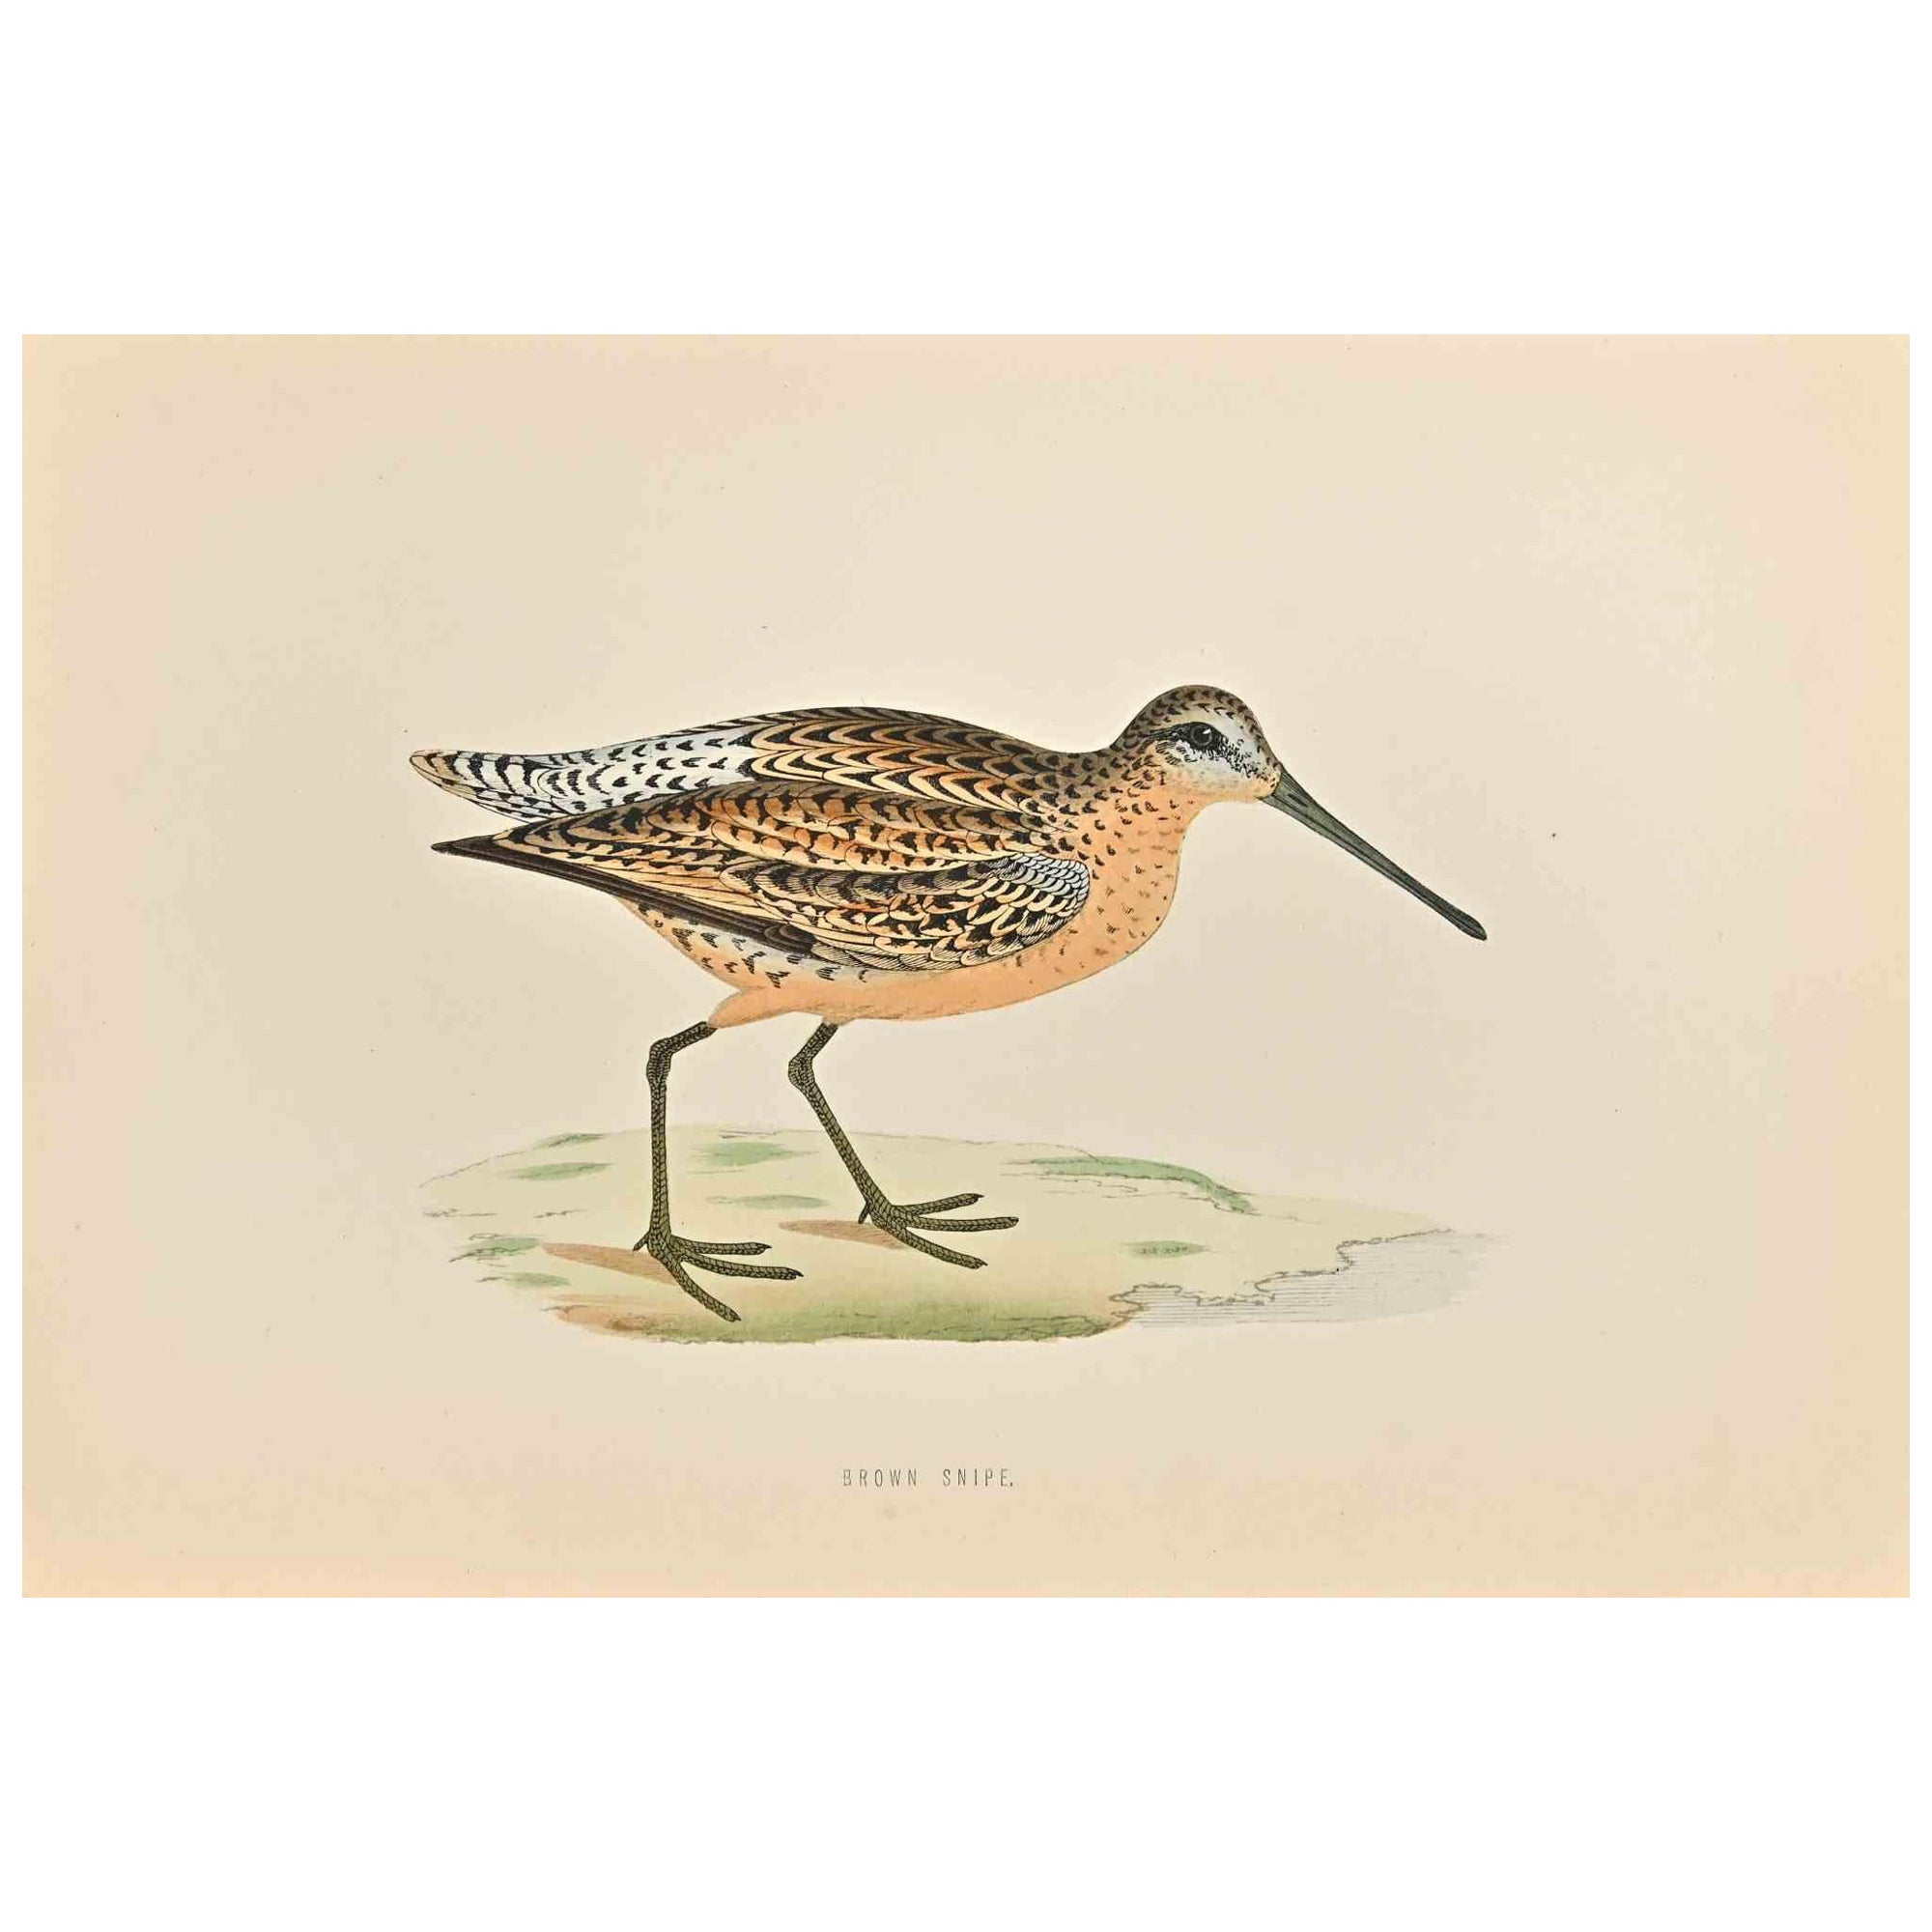 Brown Snipe is a modern artwork realized in 1870 by the British artist Alexander Francis Lydon (1836-1917).

Woodcut print on ivory-colored paper.

Hand-colored, published by London, Bell & Sons, 1870.  

The name of the bird is printed on the